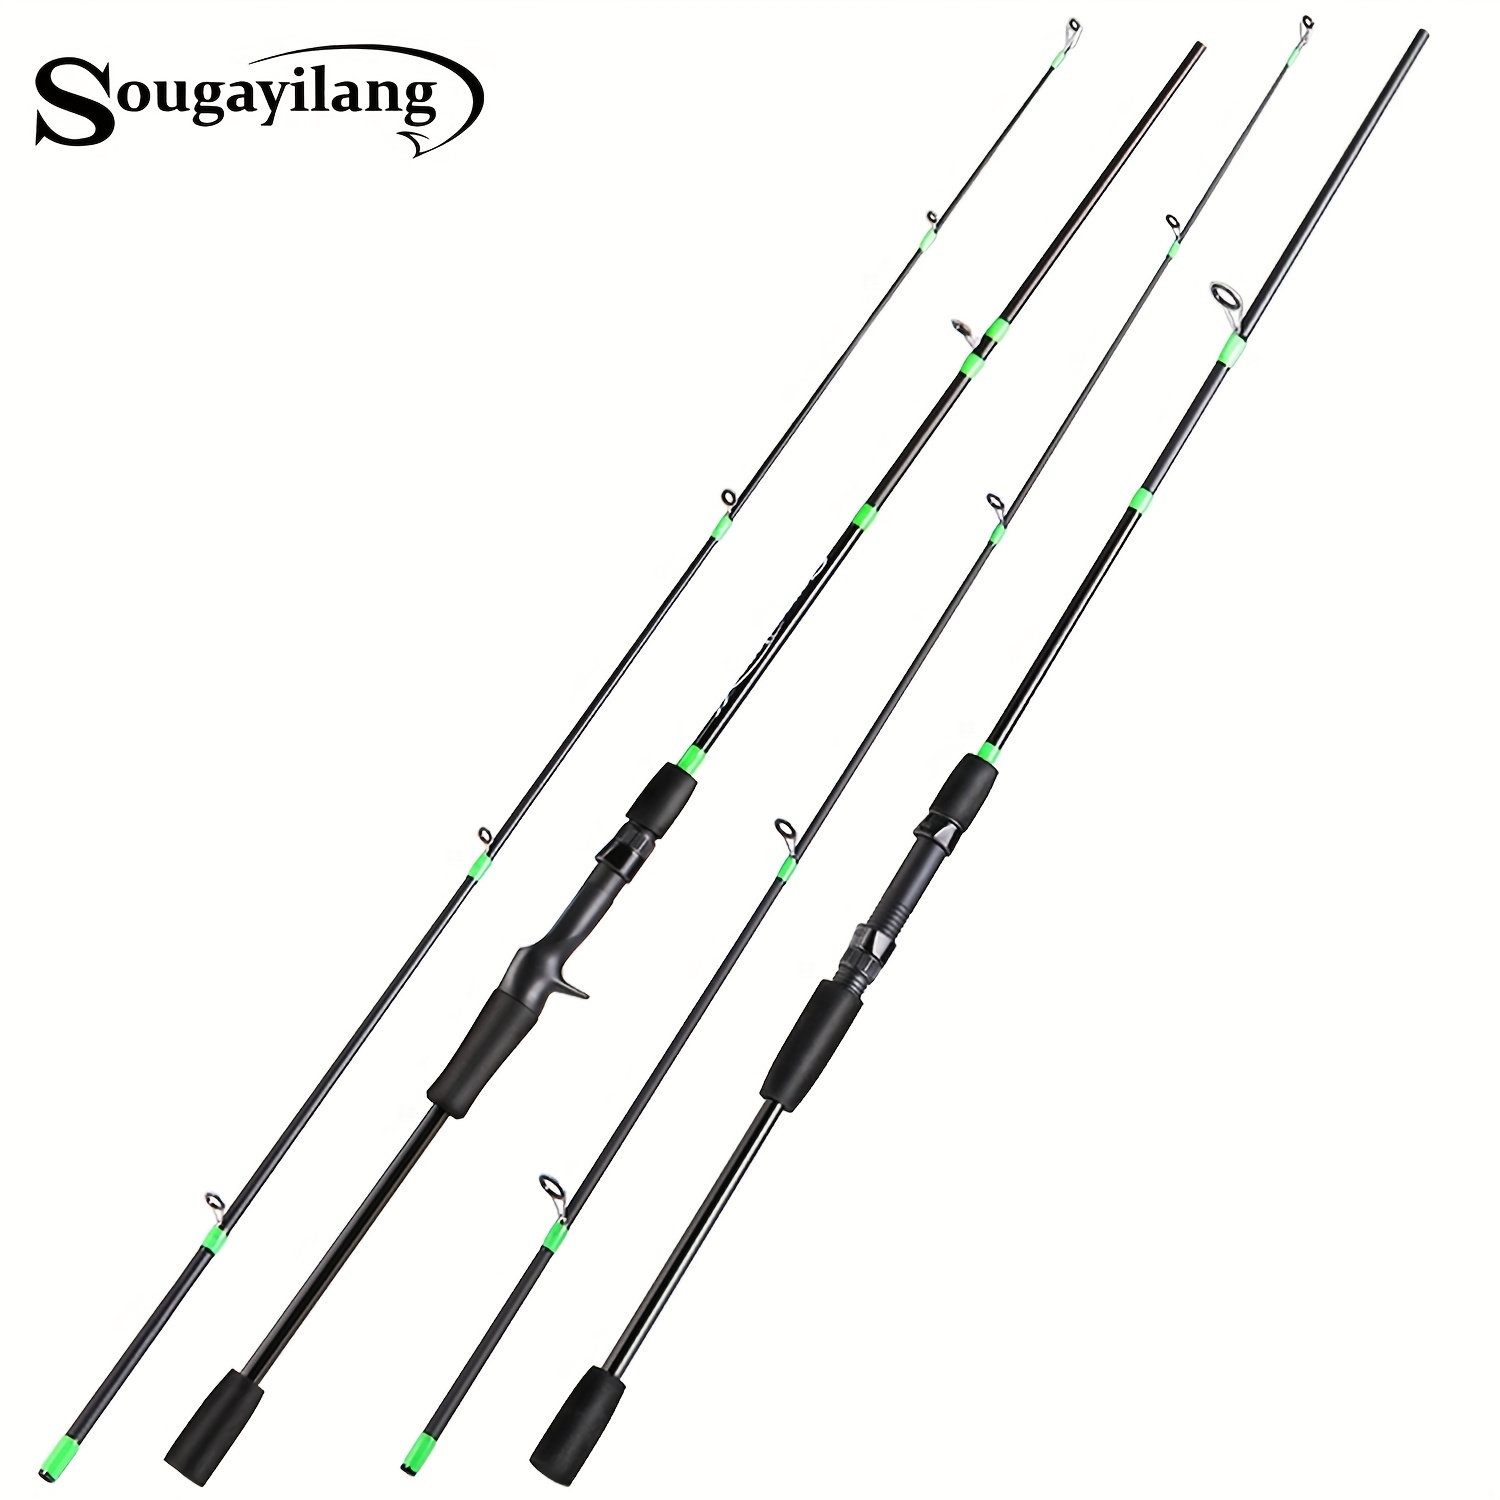 4-Section Travel Fishing Rod,Fishing Pole,Surf Casting/Spinning  Rod,Ultralight Fishing Baitcast Rod 6ft-7ft for Saltwater Trout, Bass